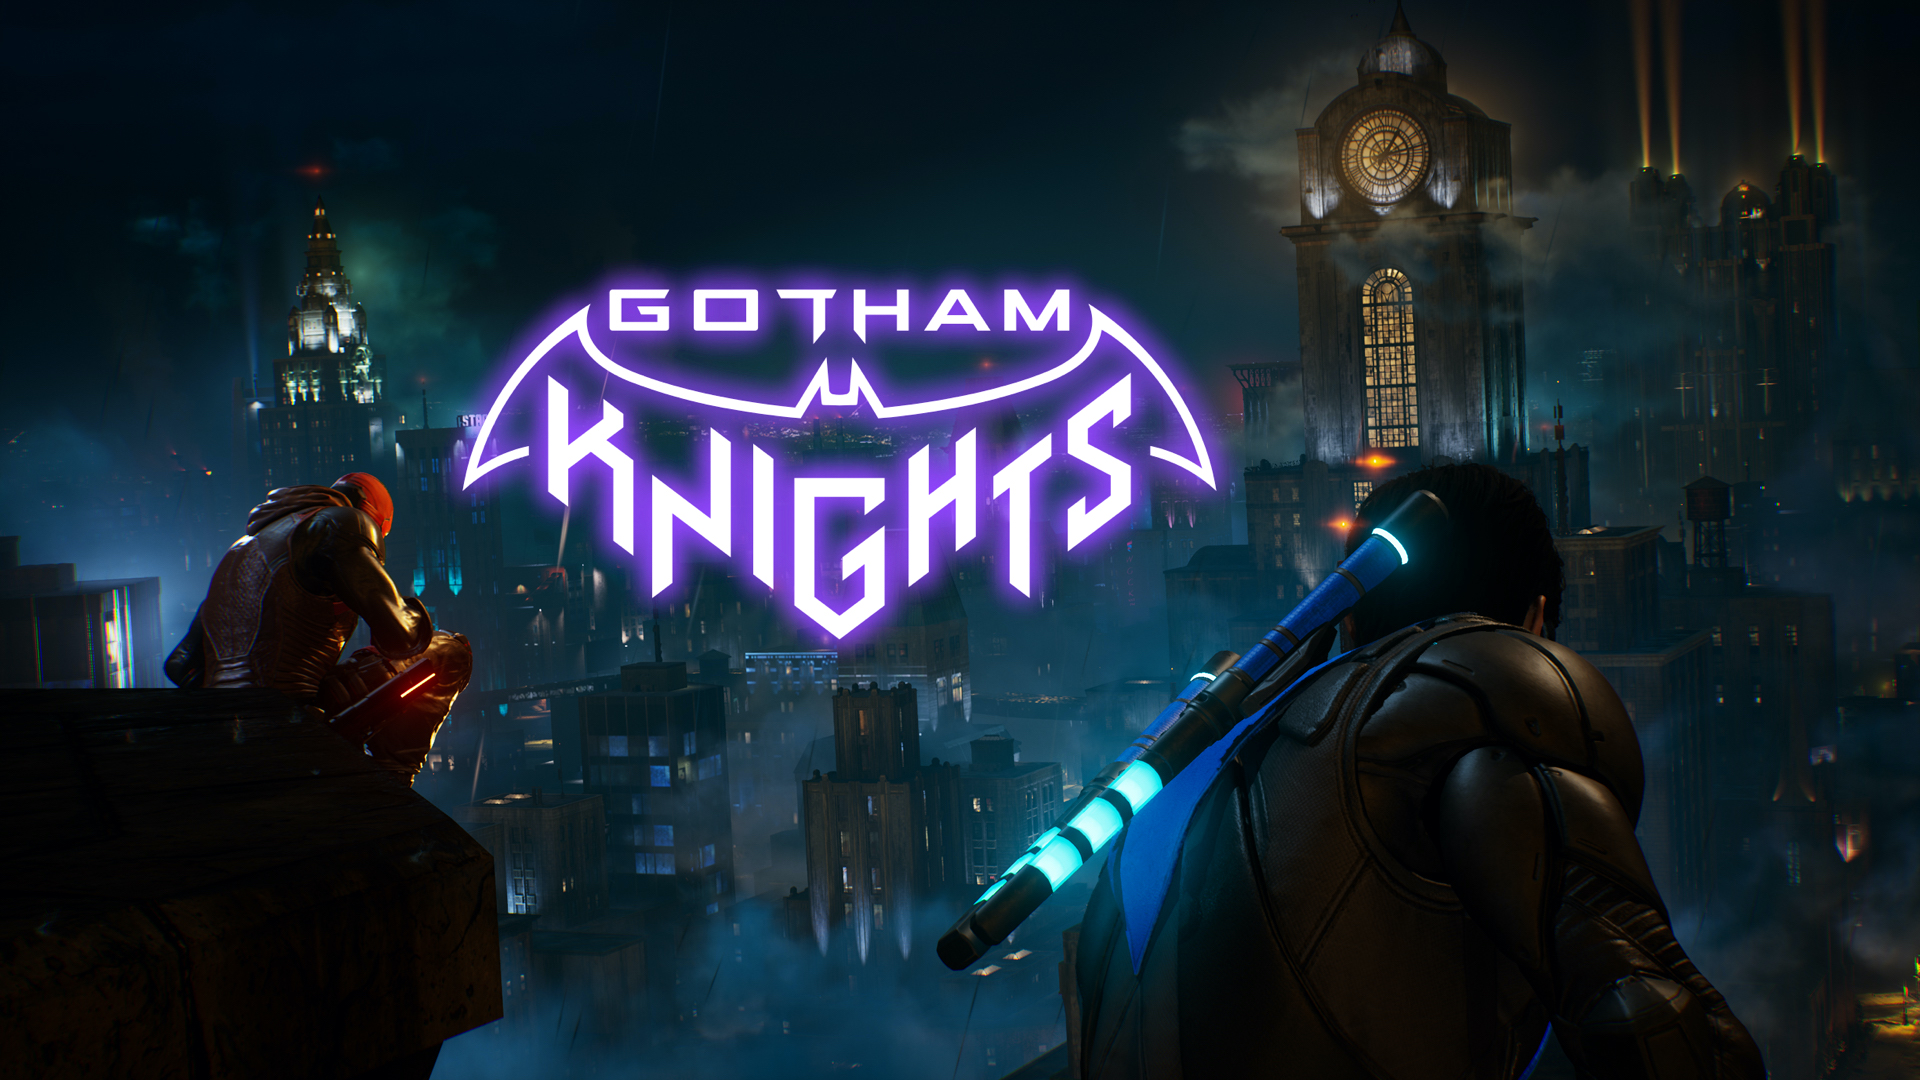 Knew I Wasn't Crazy!. Gotham Knights Will Be Having CrossPlay, TLM Partners  Are Doing The Job. They Have Worked On Titles Such As 2K Games, Activision,  And Back 4 Blood. : r/GothamKnights